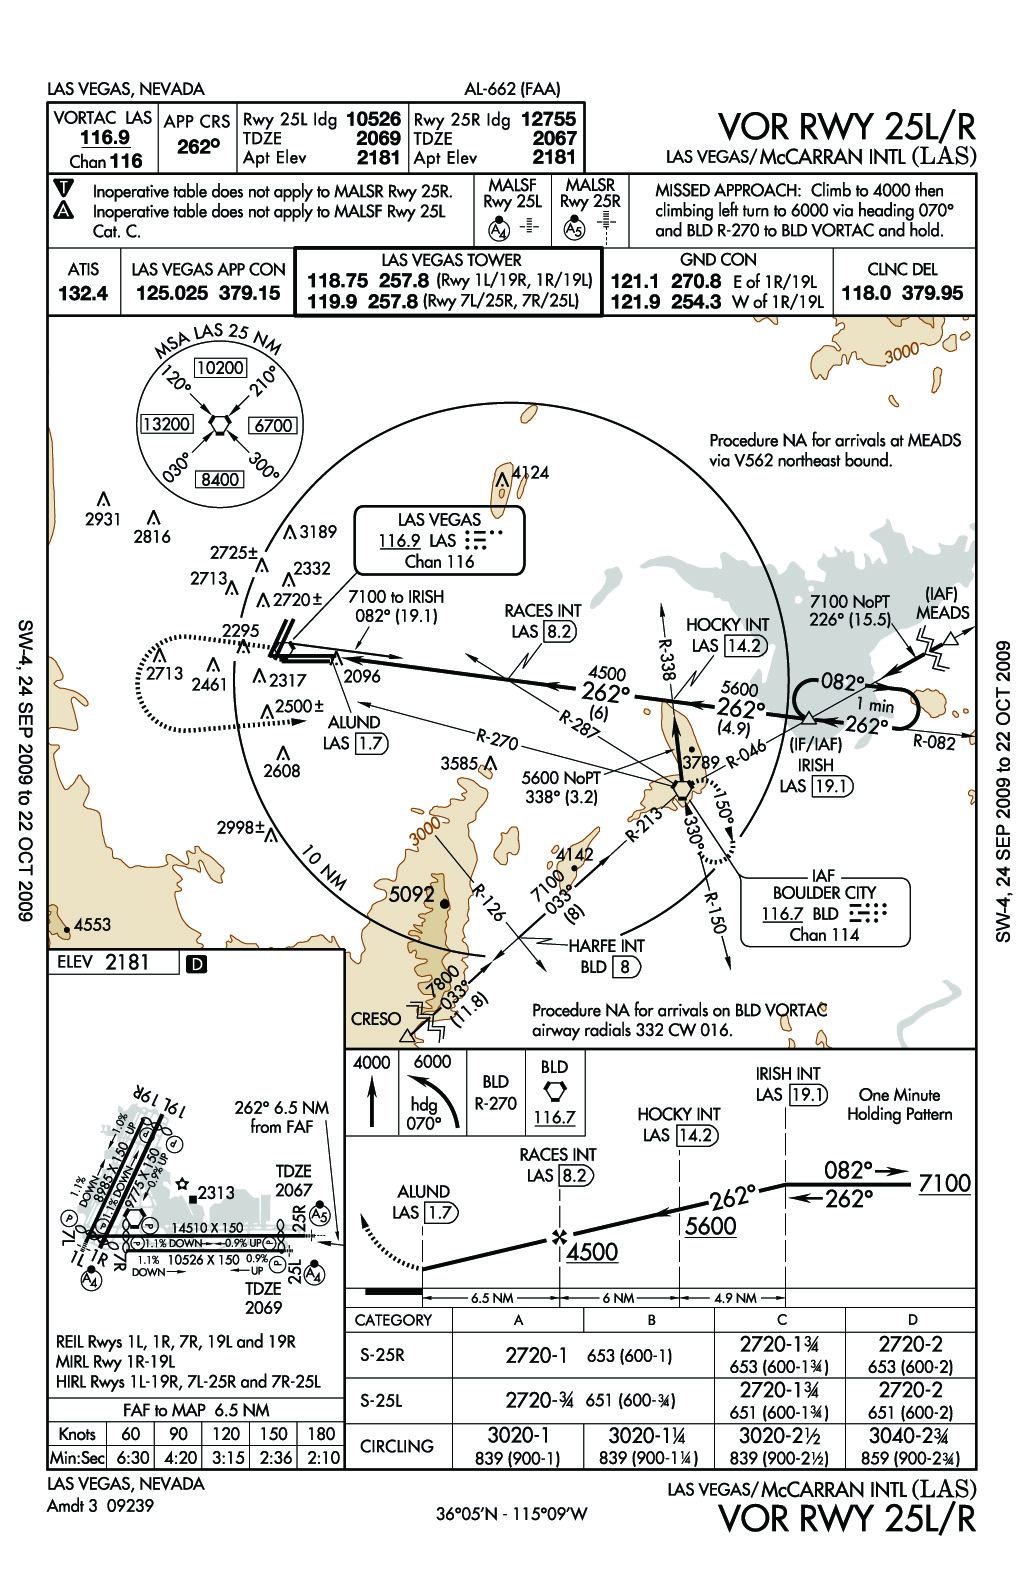 London City Airport Approach Charts